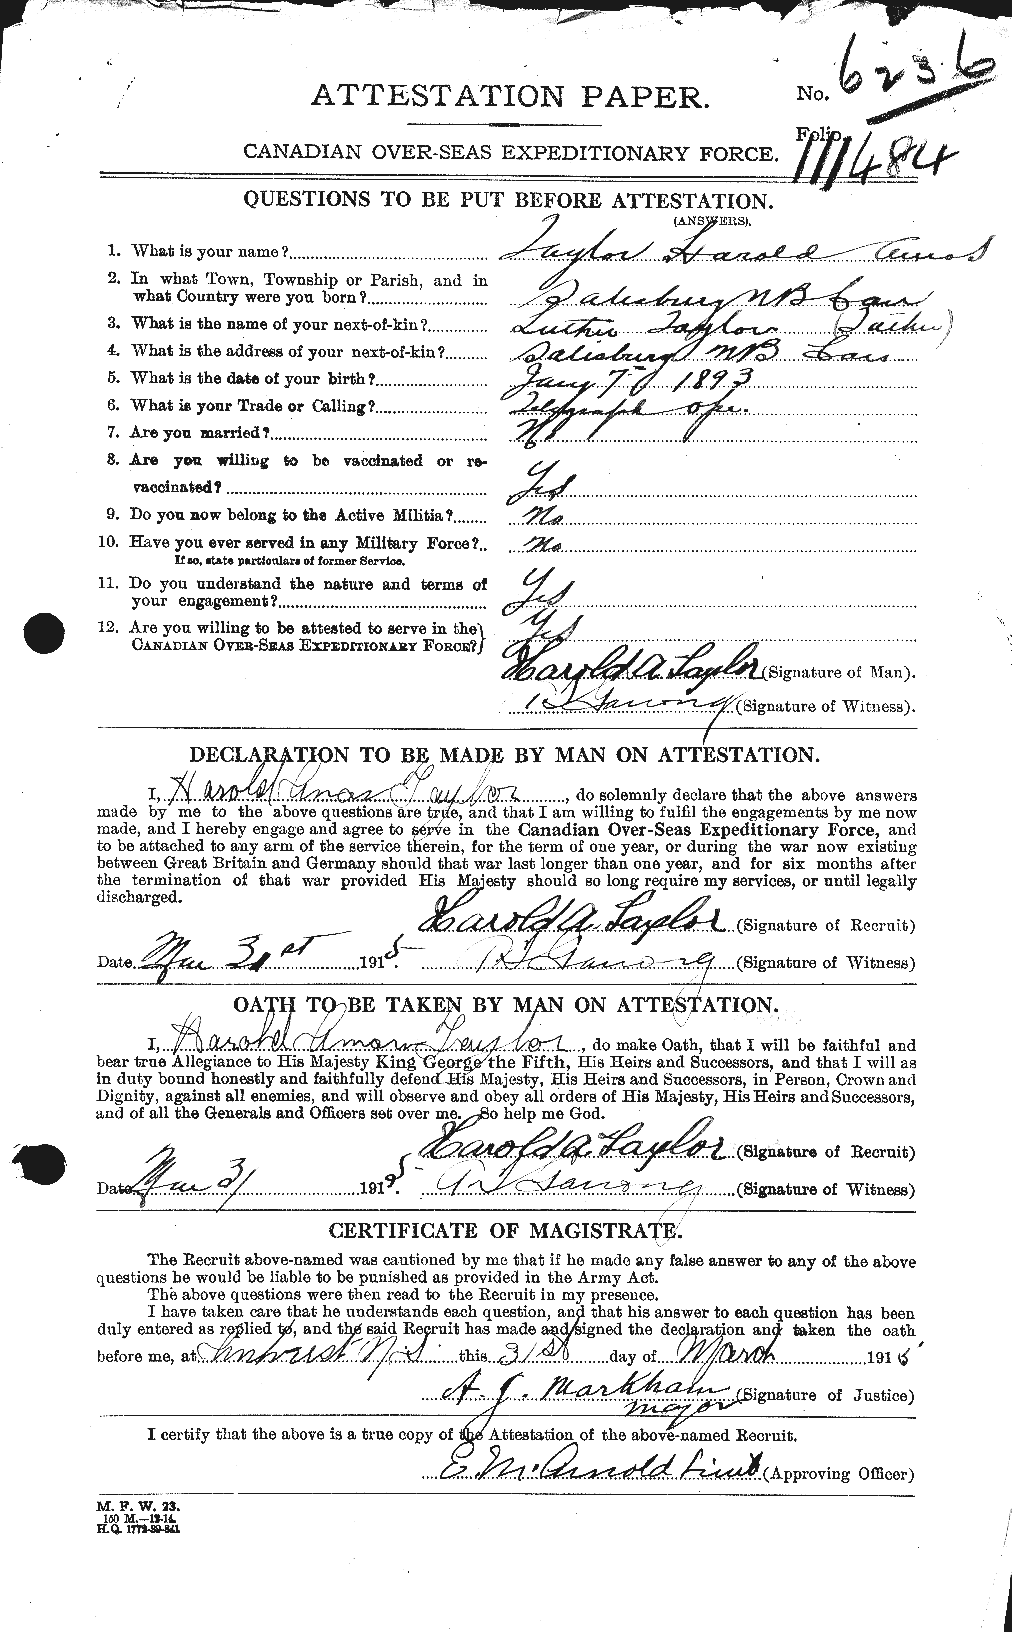 Personnel Records of the First World War - CEF 626415a